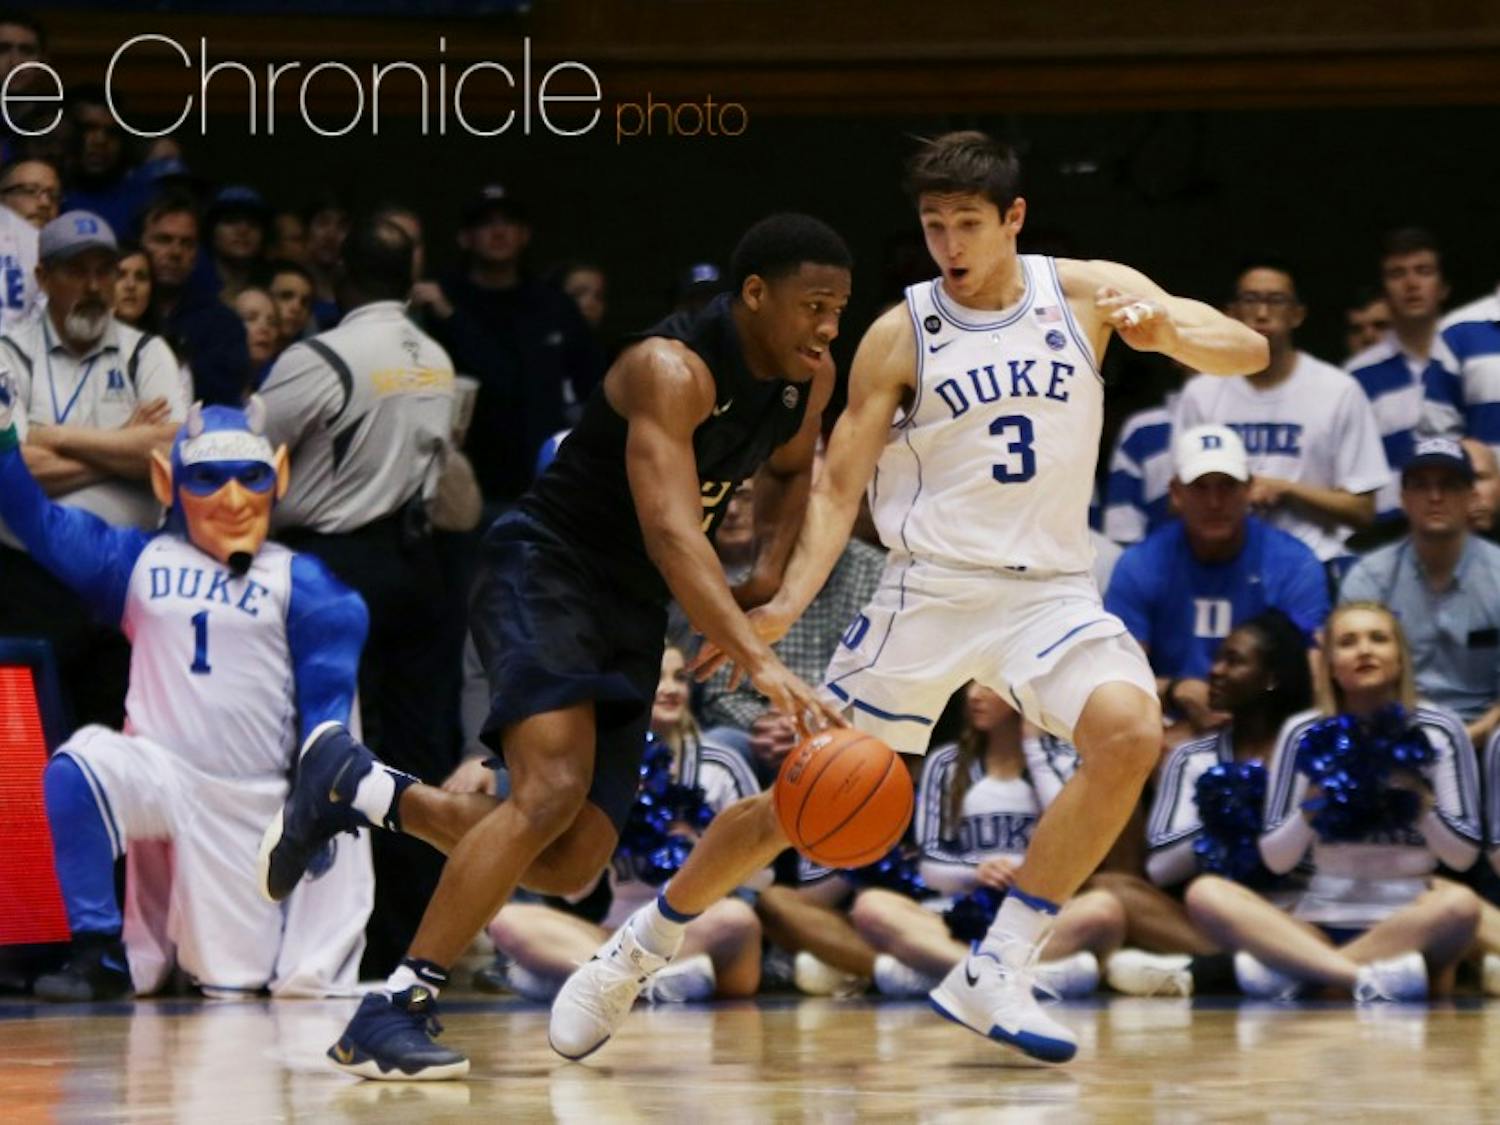 Grayson Allen drilled four 3-pointers in the last eight minutes of the game to help the Blue Devils pull away.